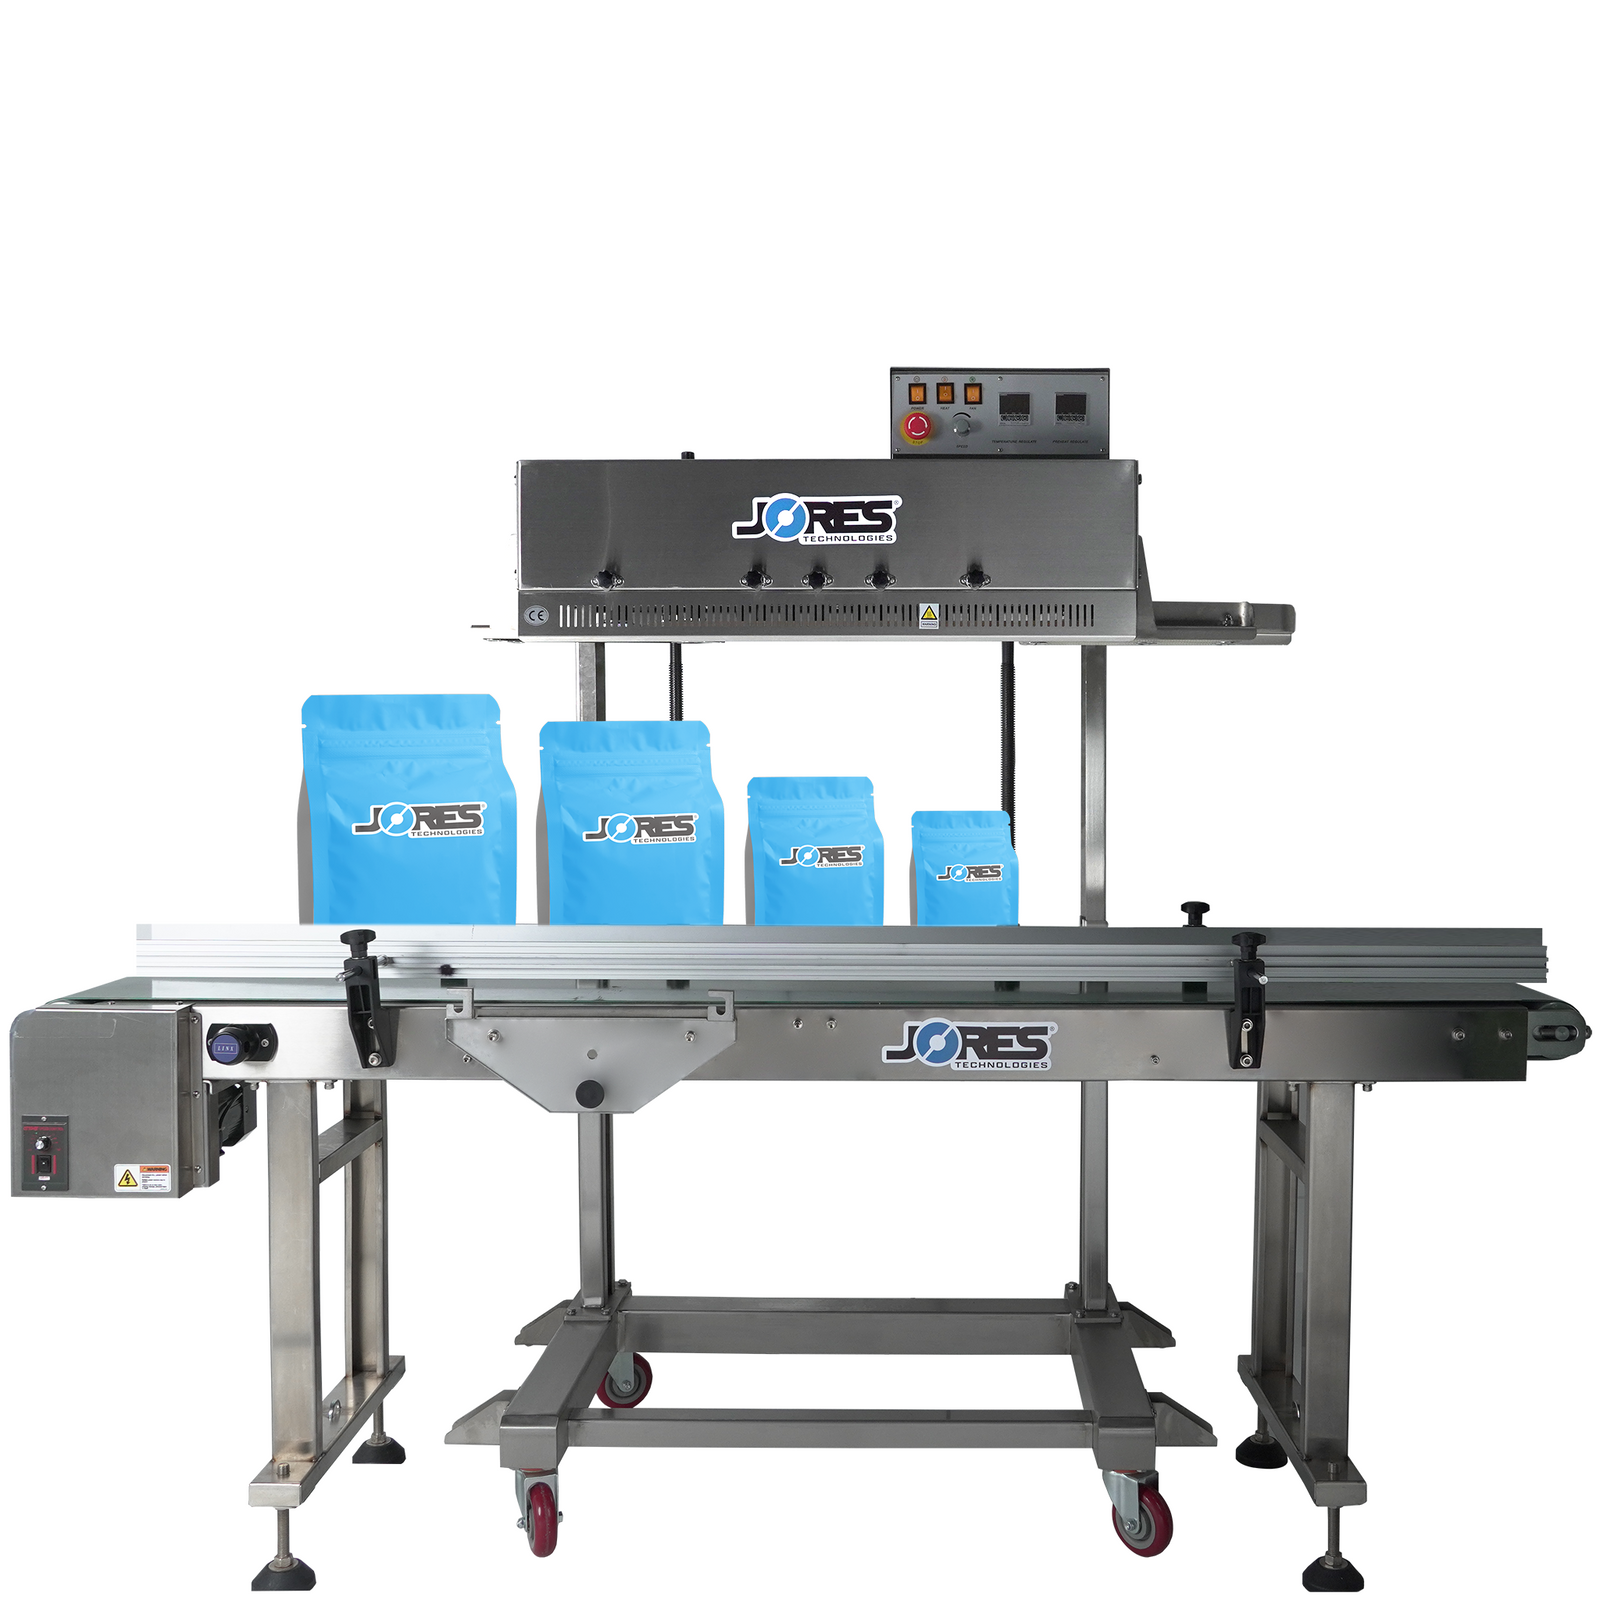 Conveyorless continuous band sealer for variable bag heights